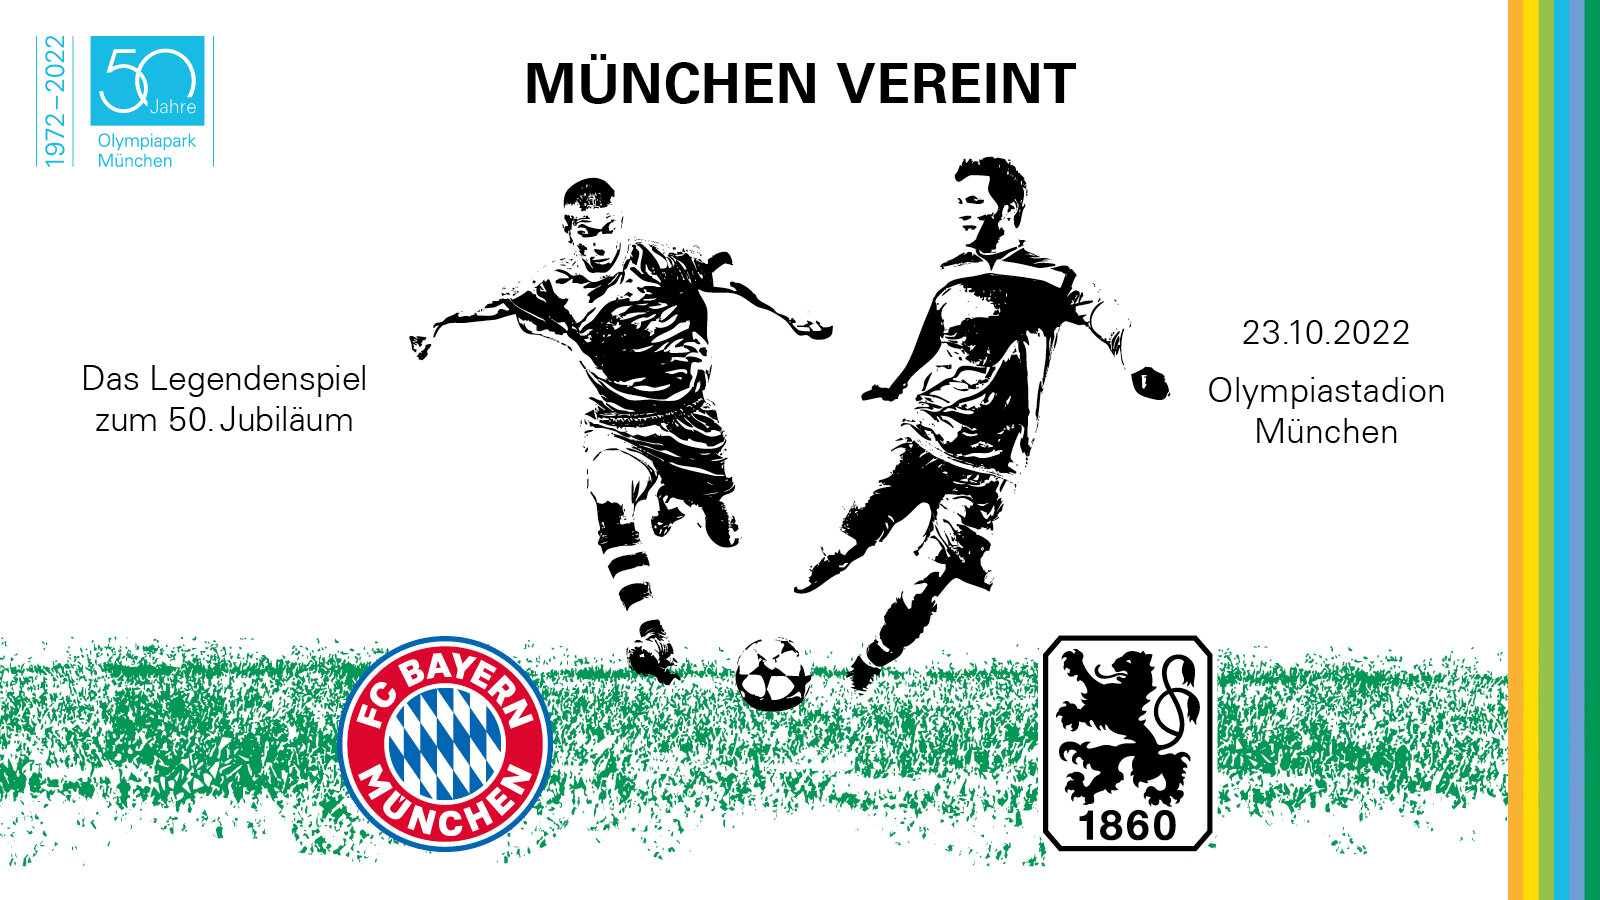 MUNICH UNITED - The teams of FC Bayern and TSV 1860 are complete